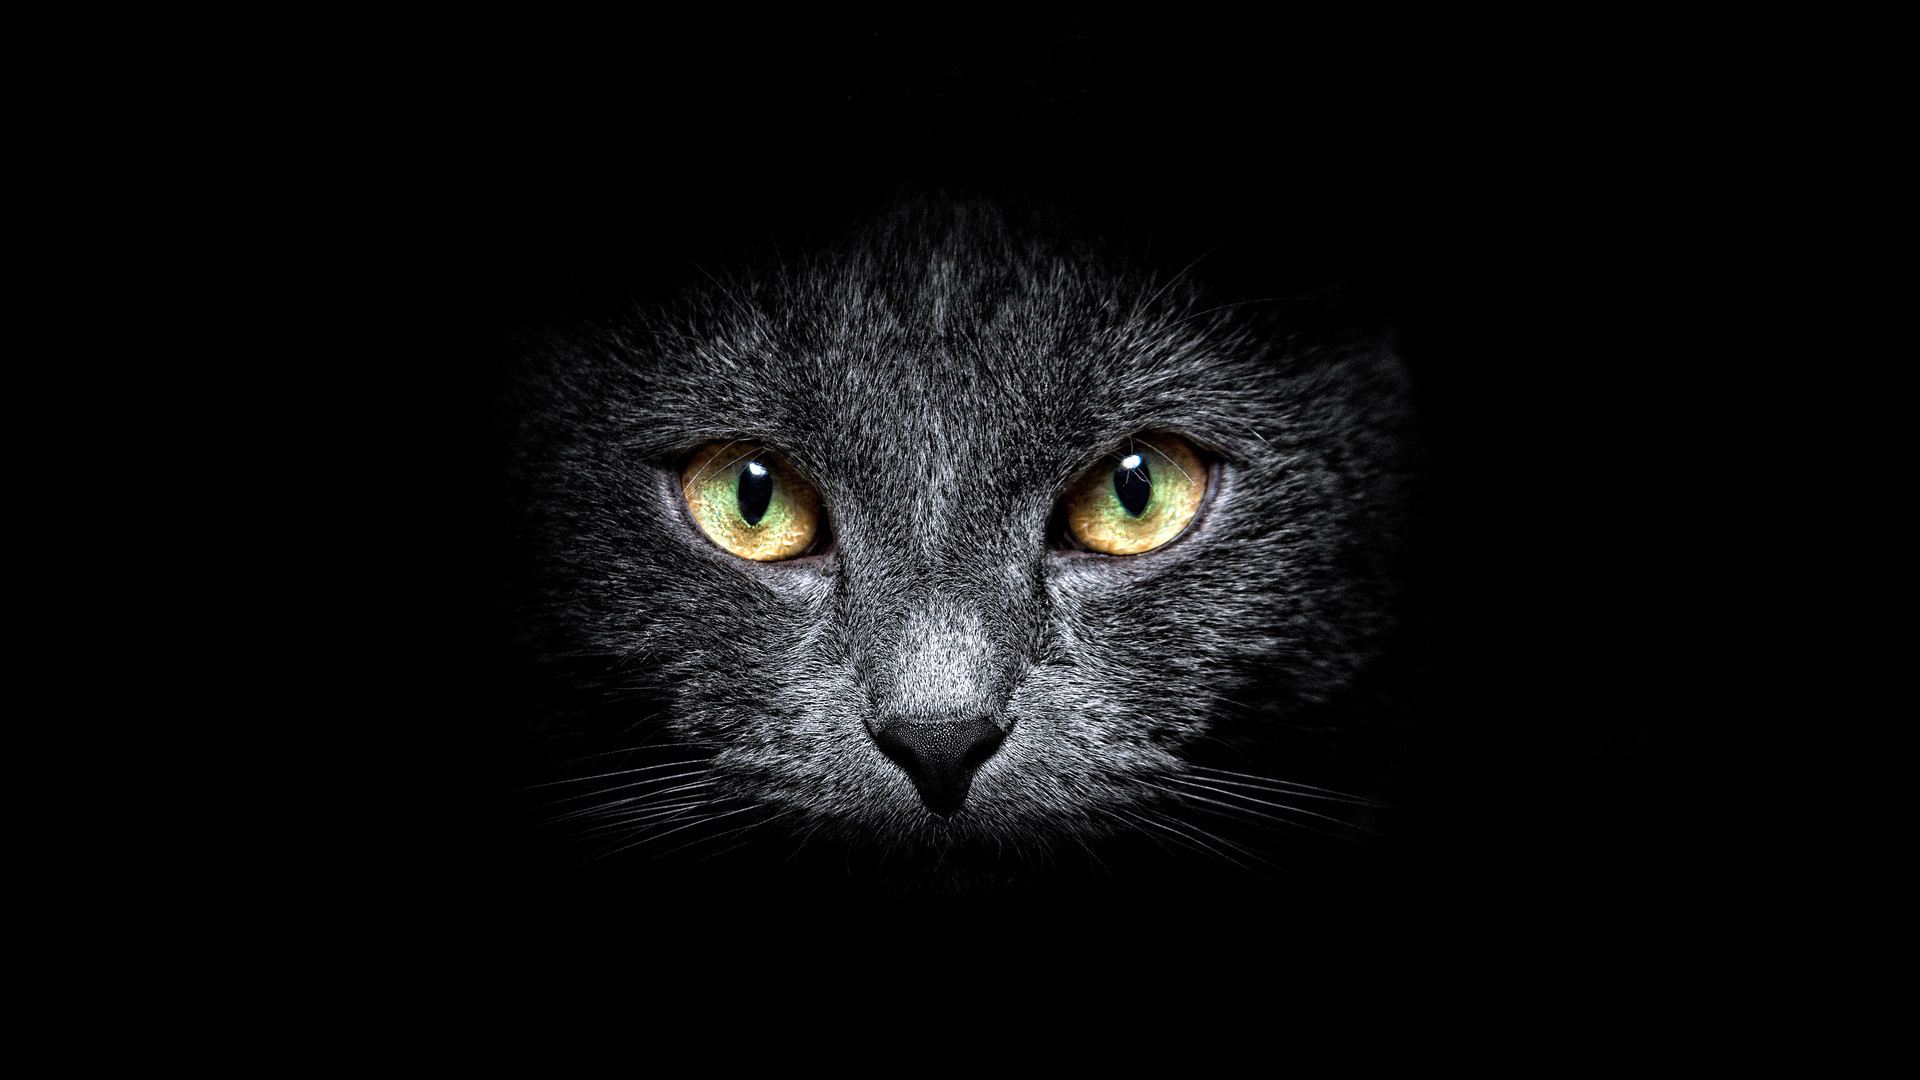 1920x1080 The muzzle of a cat on a black background